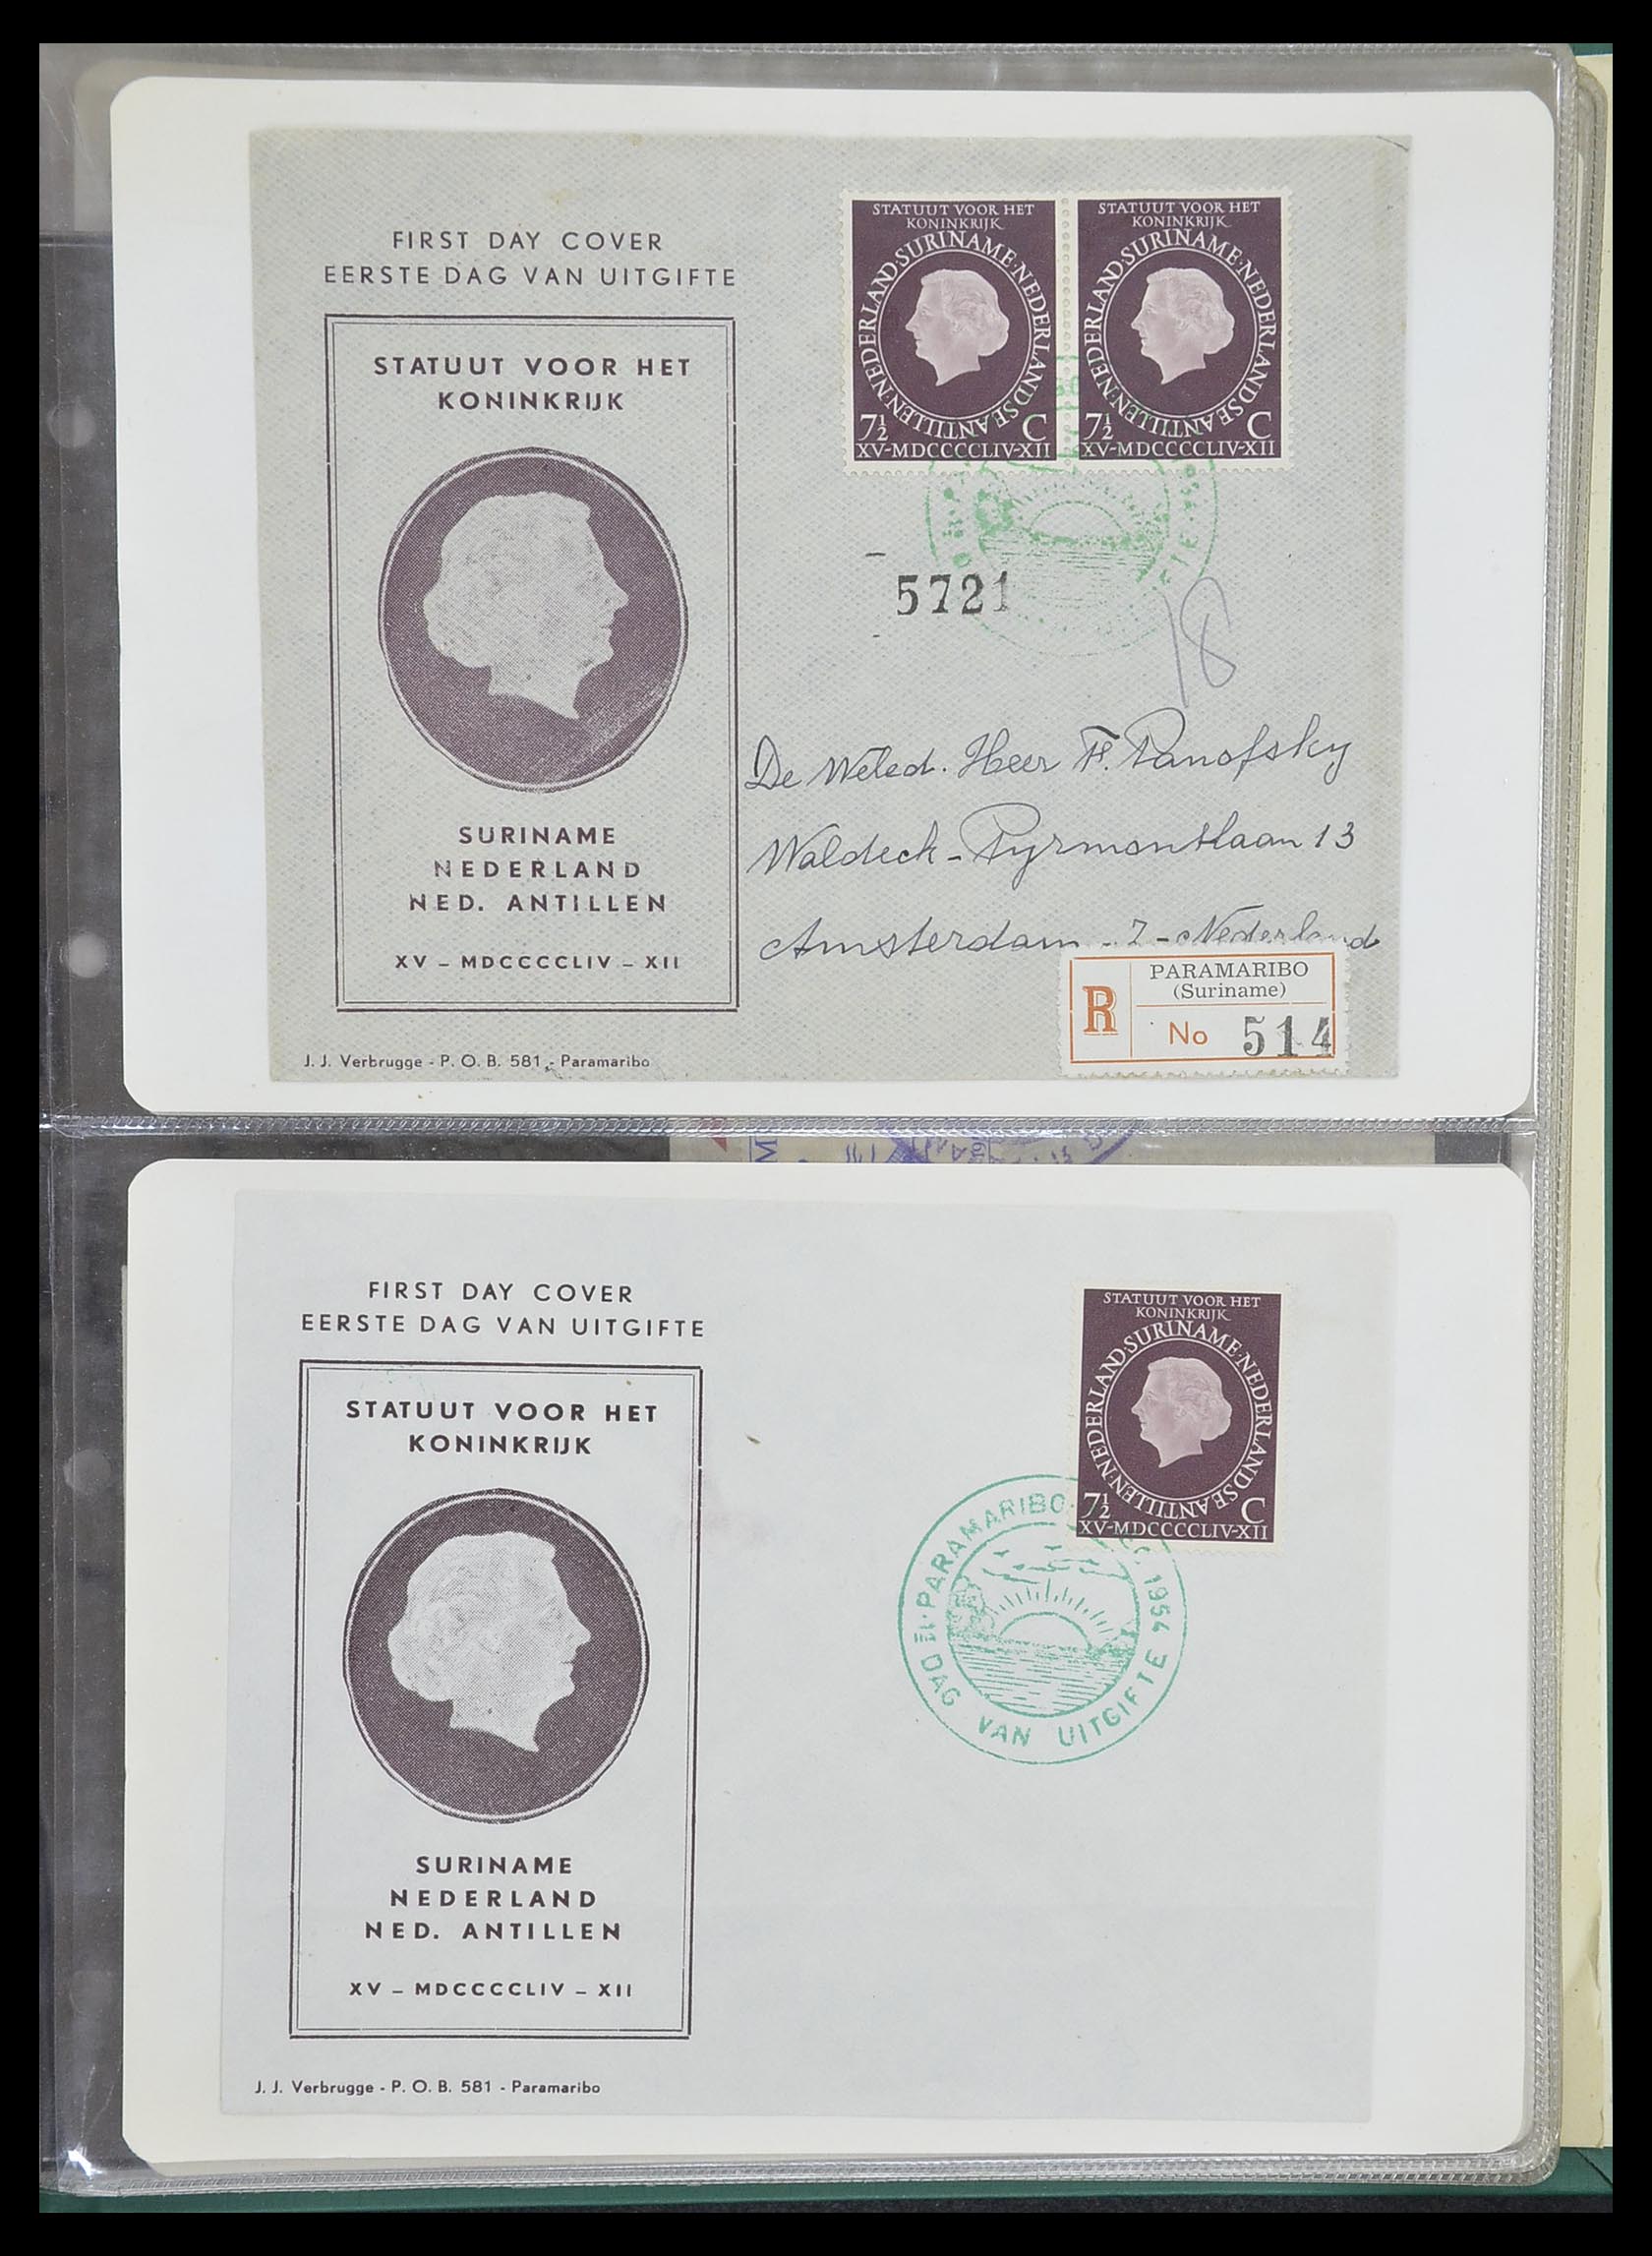 33333 058 - Stamp collection 33333 Dutch territories covers 1873-1959.